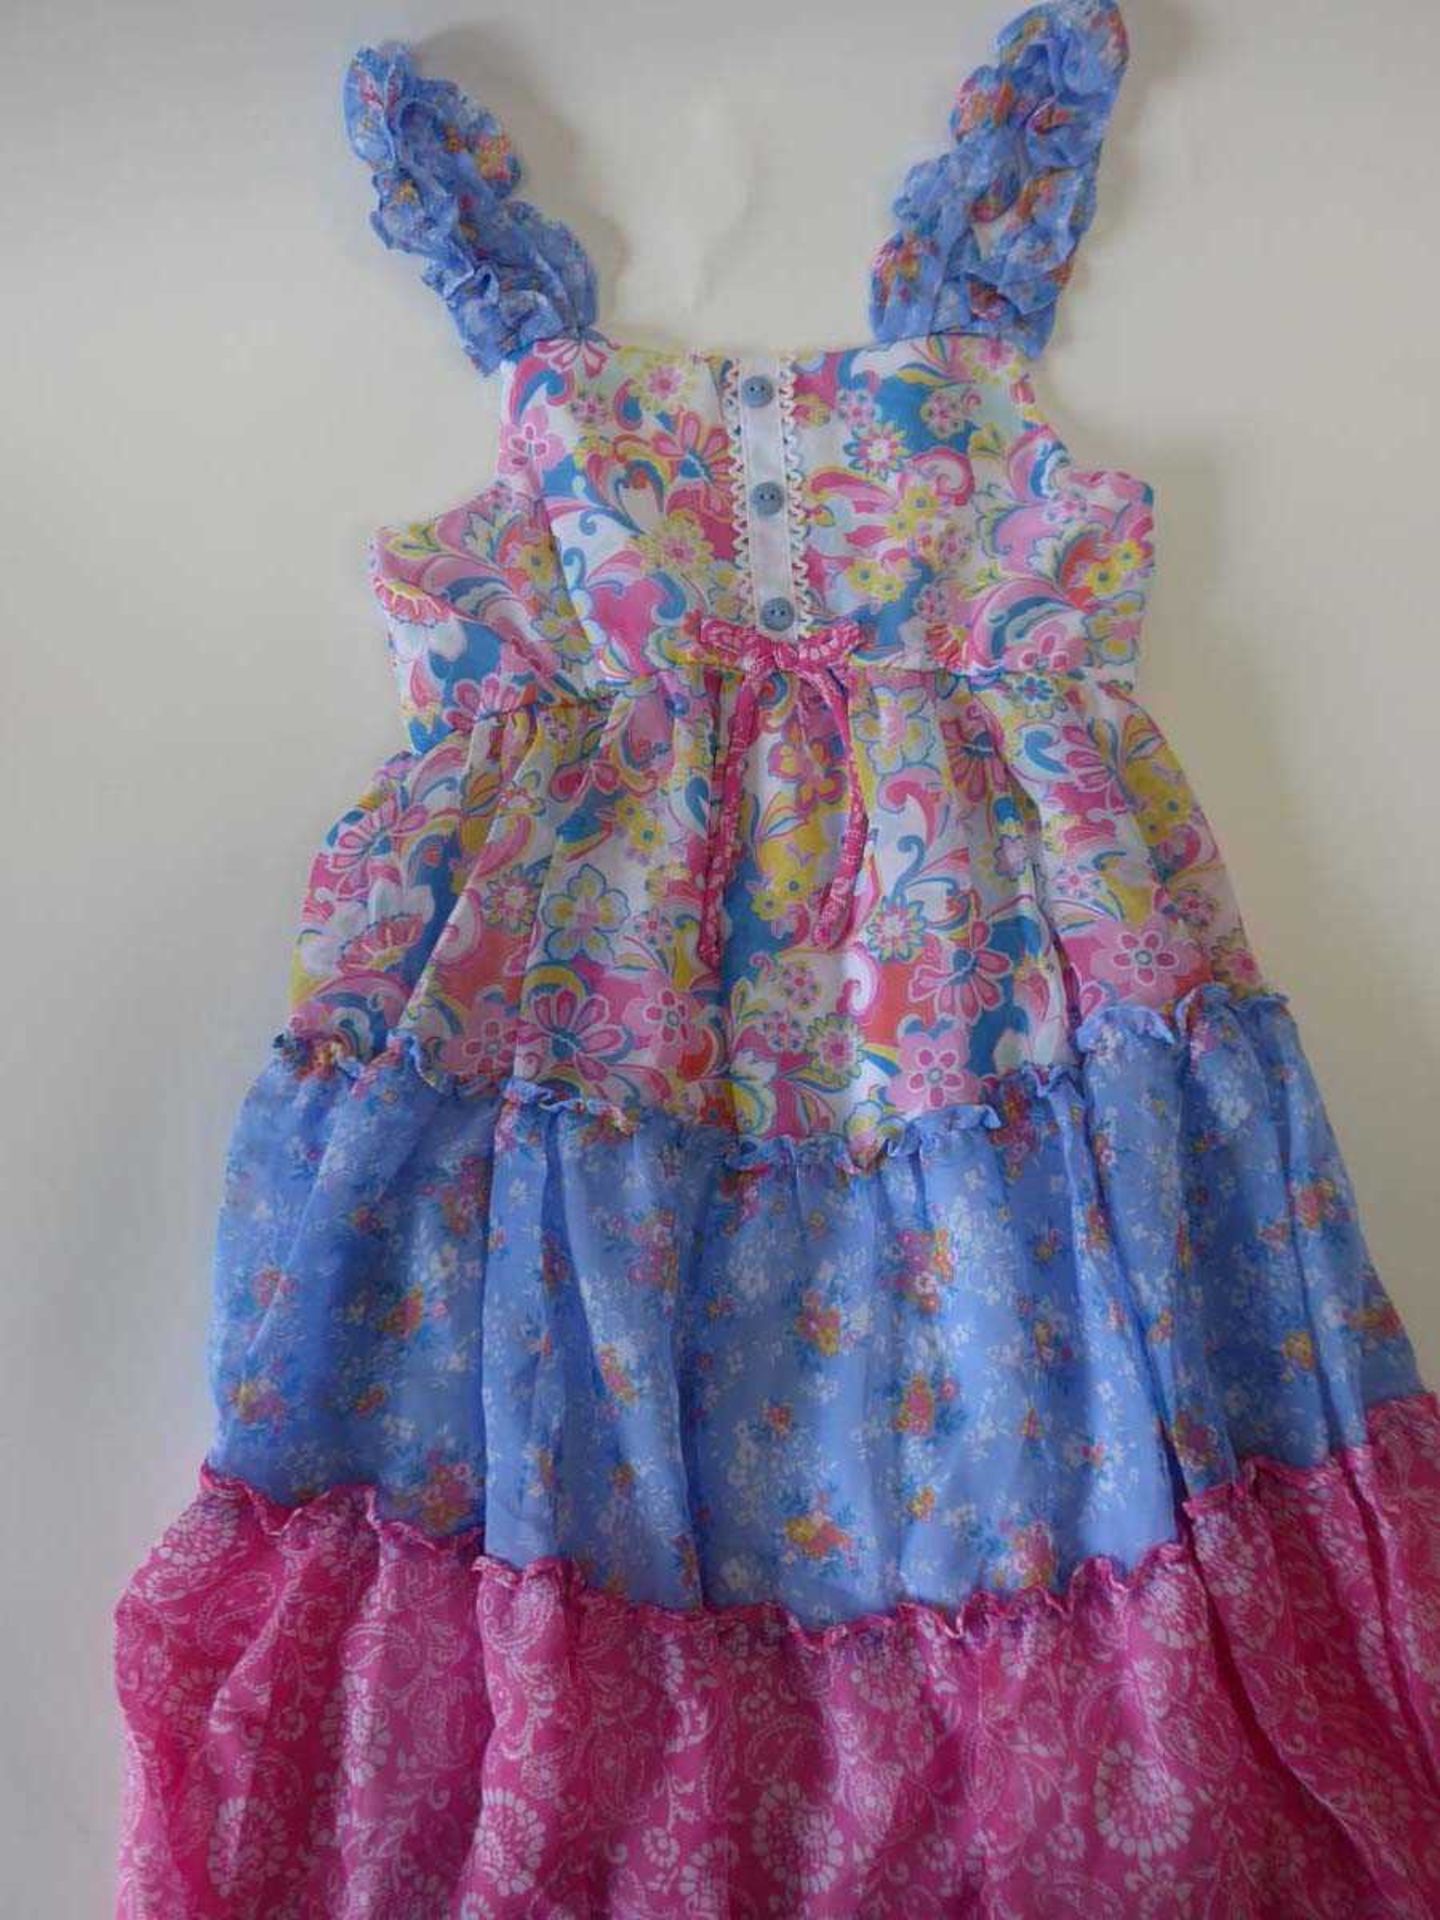 +VAT Approx. 25 children's Jona Michelle dresses, in 4 different patterns and various sizes - Image 5 of 5